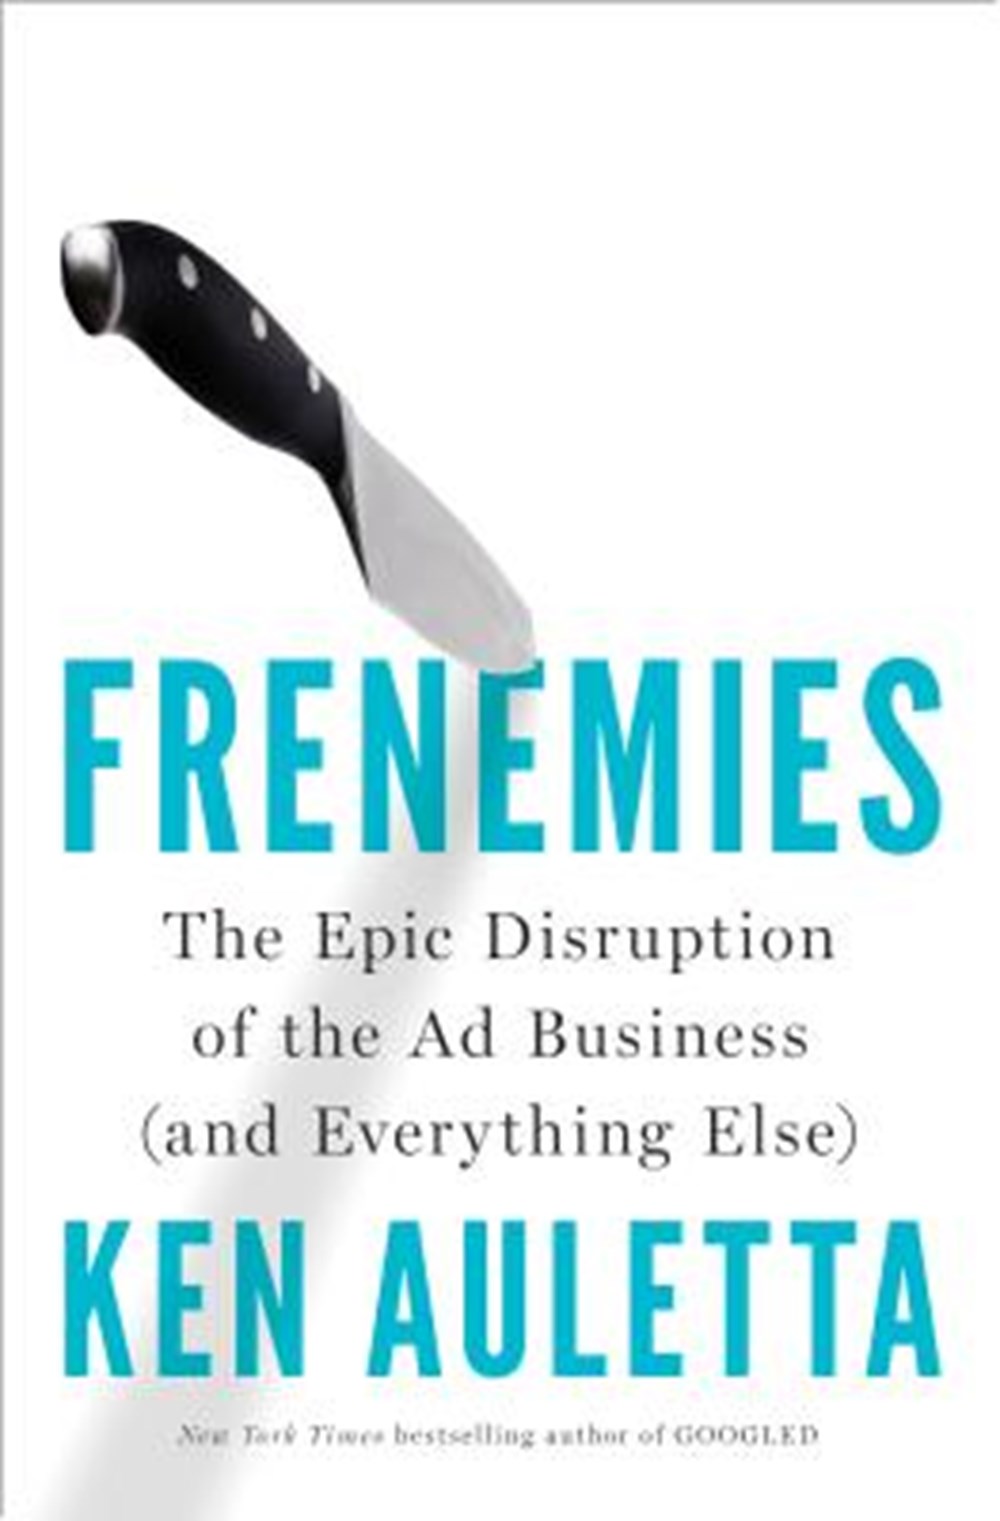 Frenemies The Epic Disruption of the Ad Business (and Everything Else)